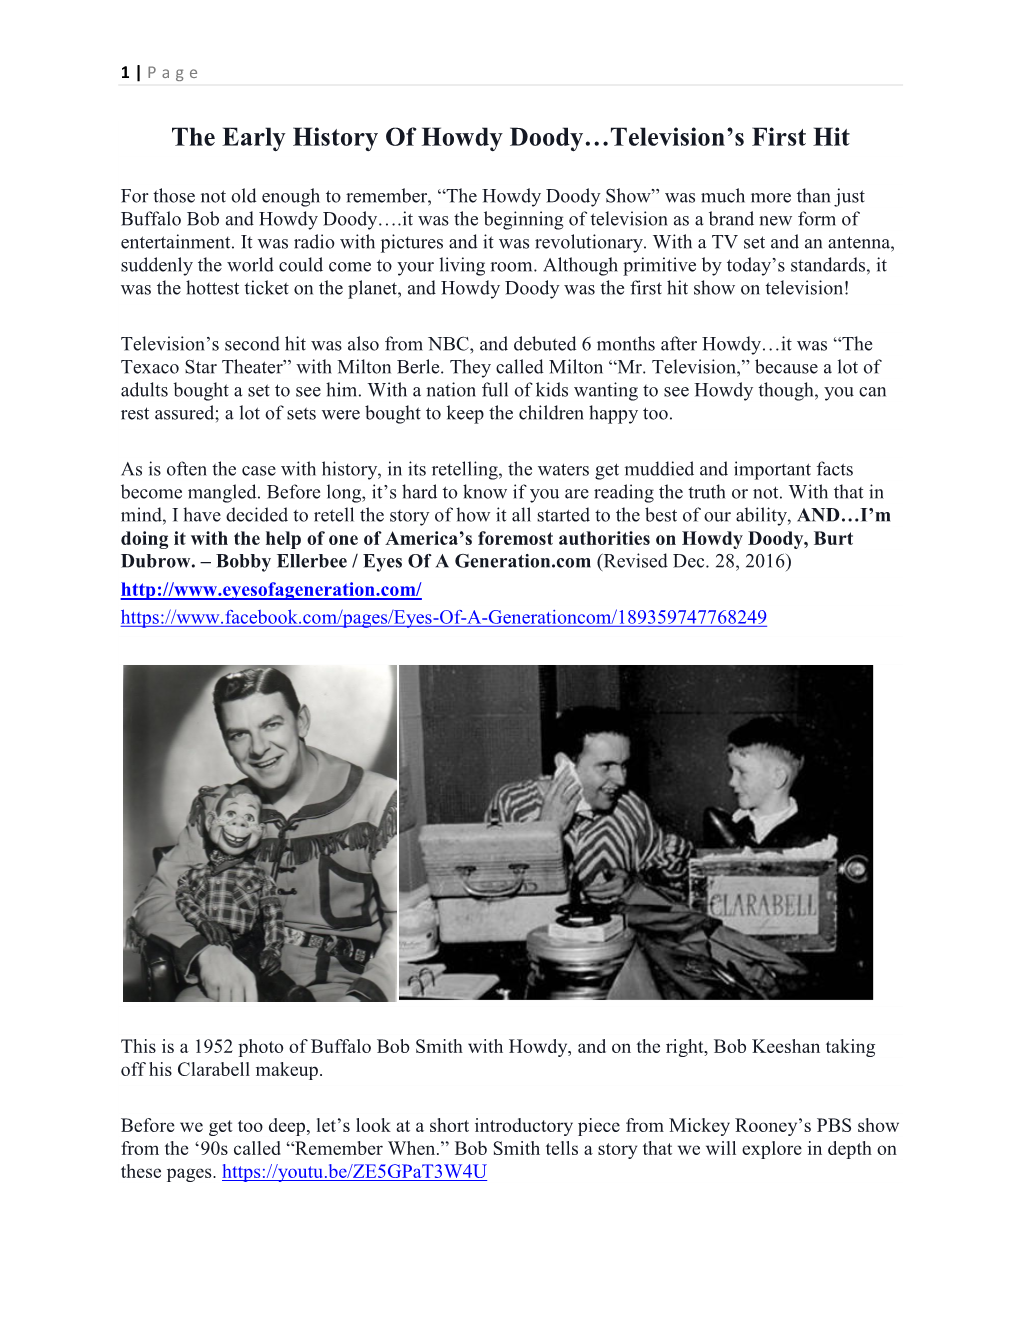 The Early History of Howdy Doody…Television's First